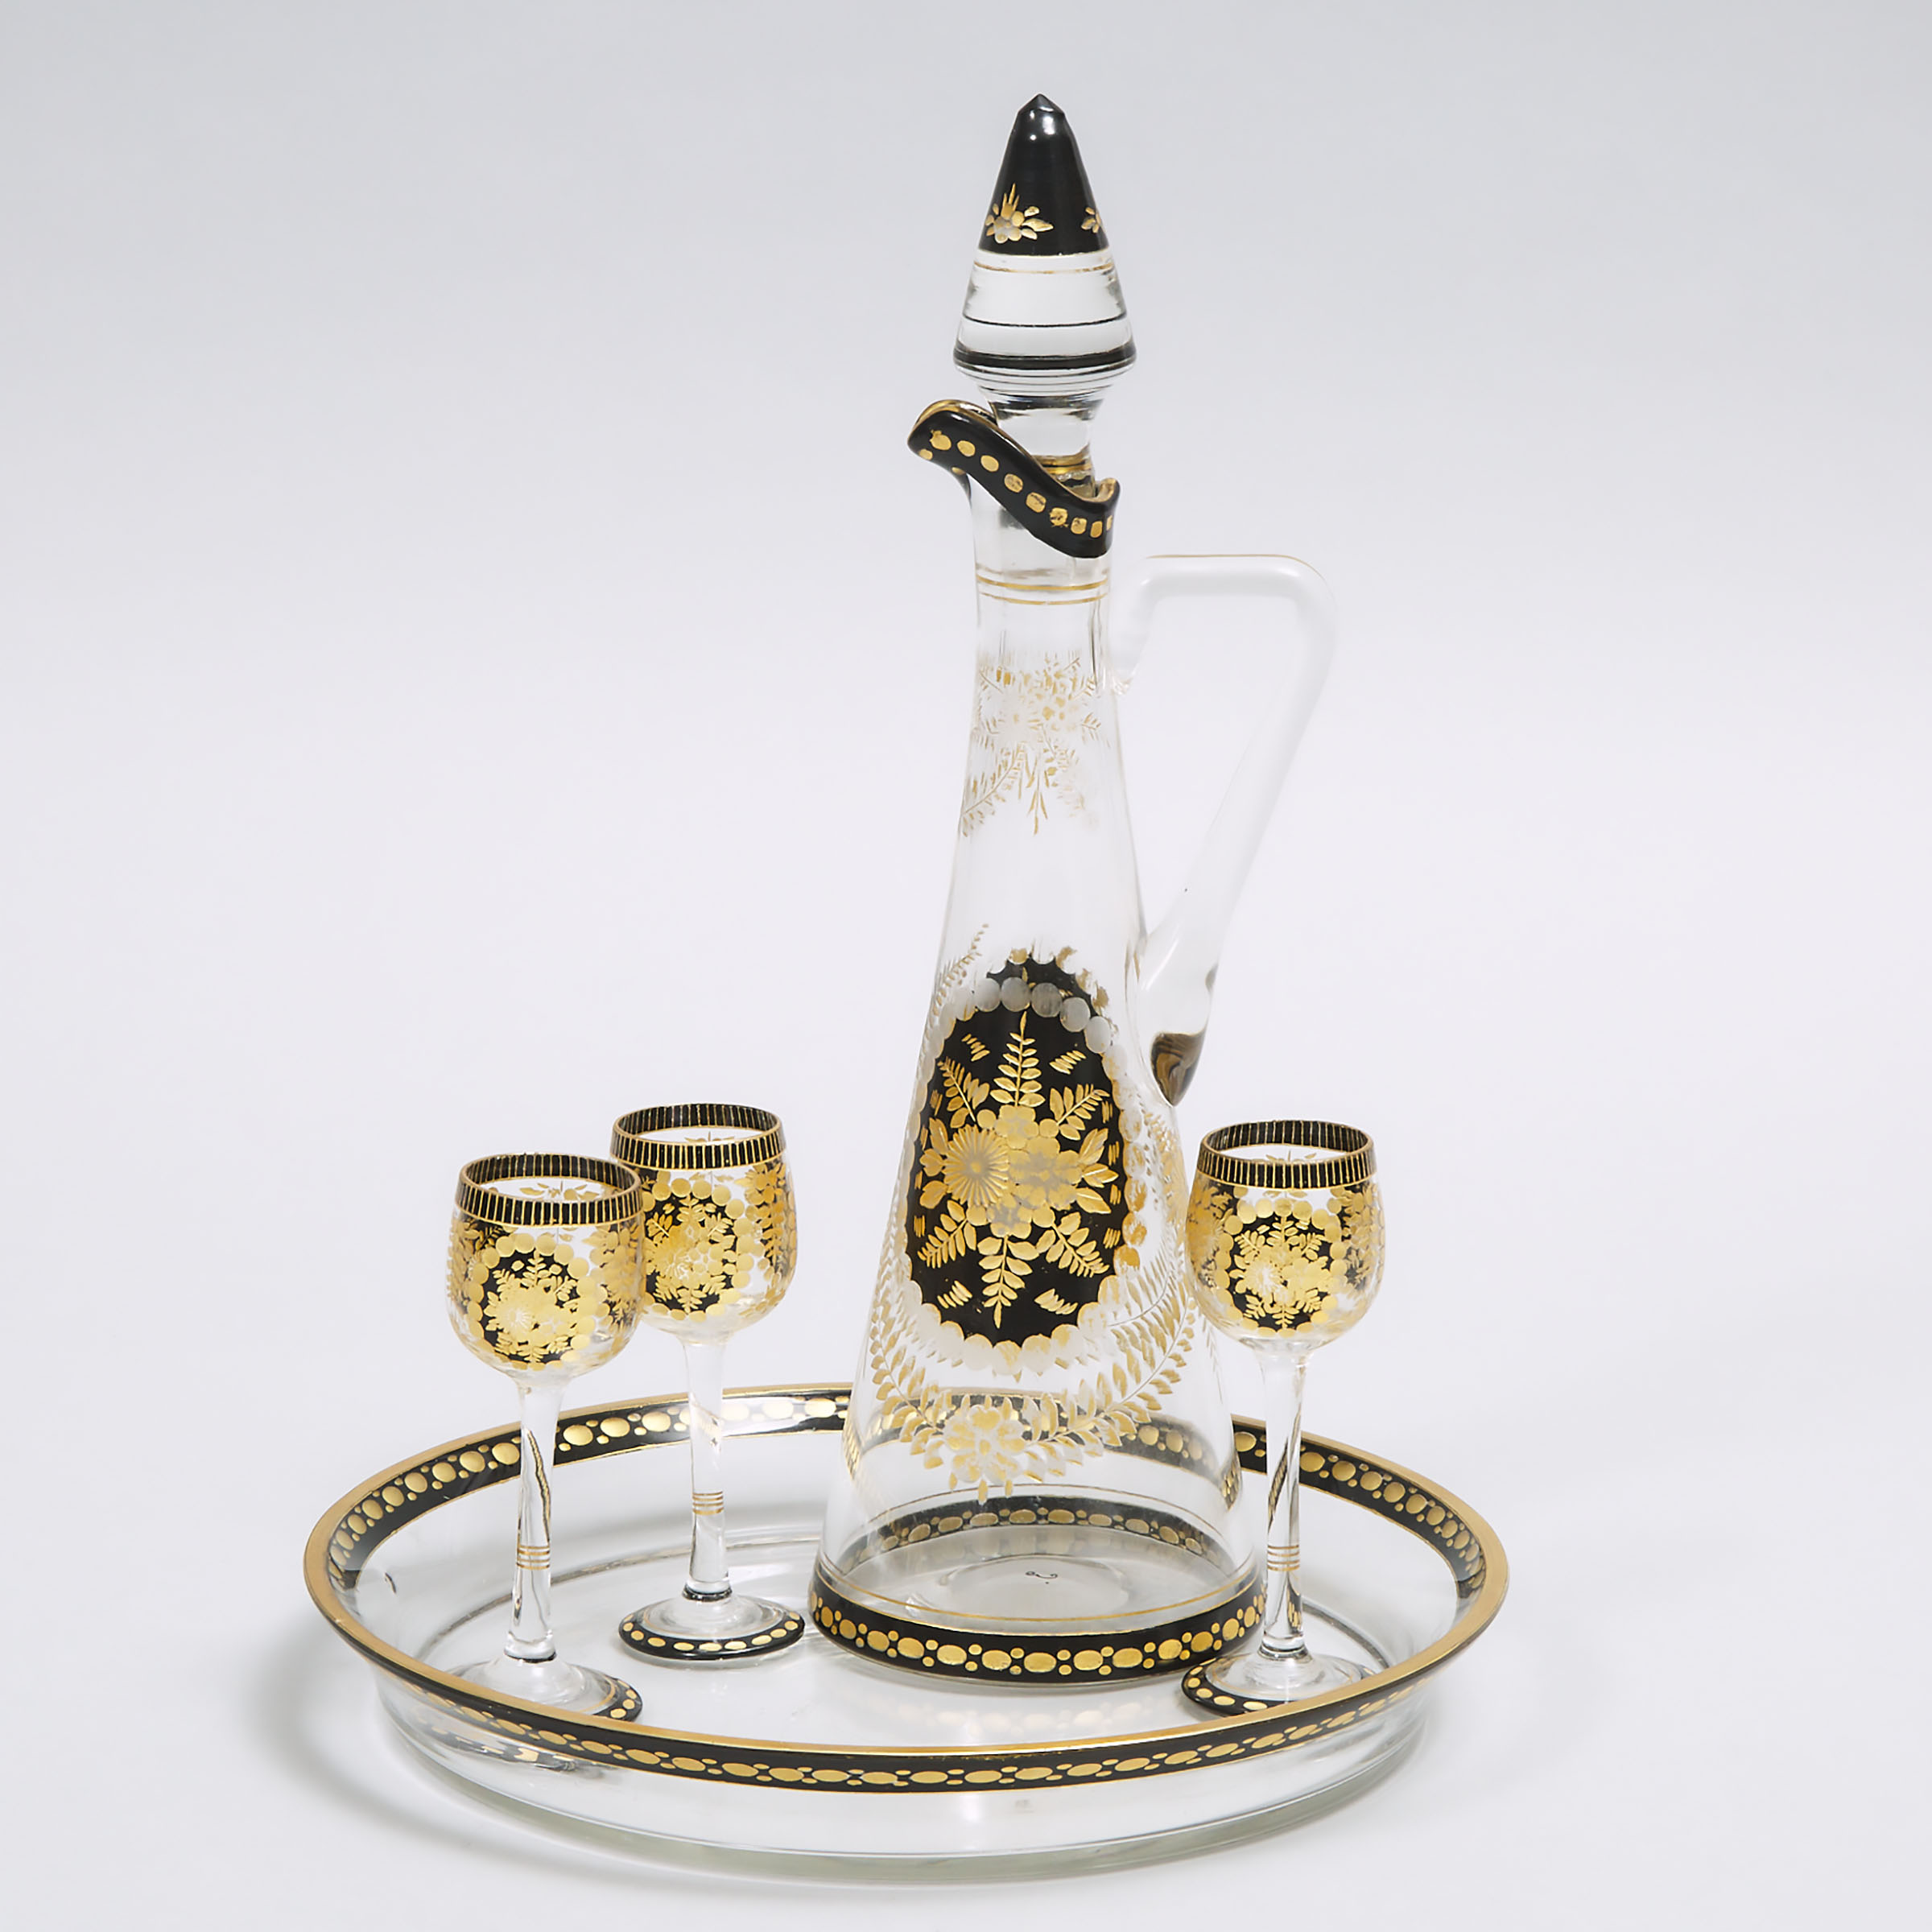 Bohemian Cut, Enameled and Gilt Glass Decanter, Tray, and Three Glasses, 20th century